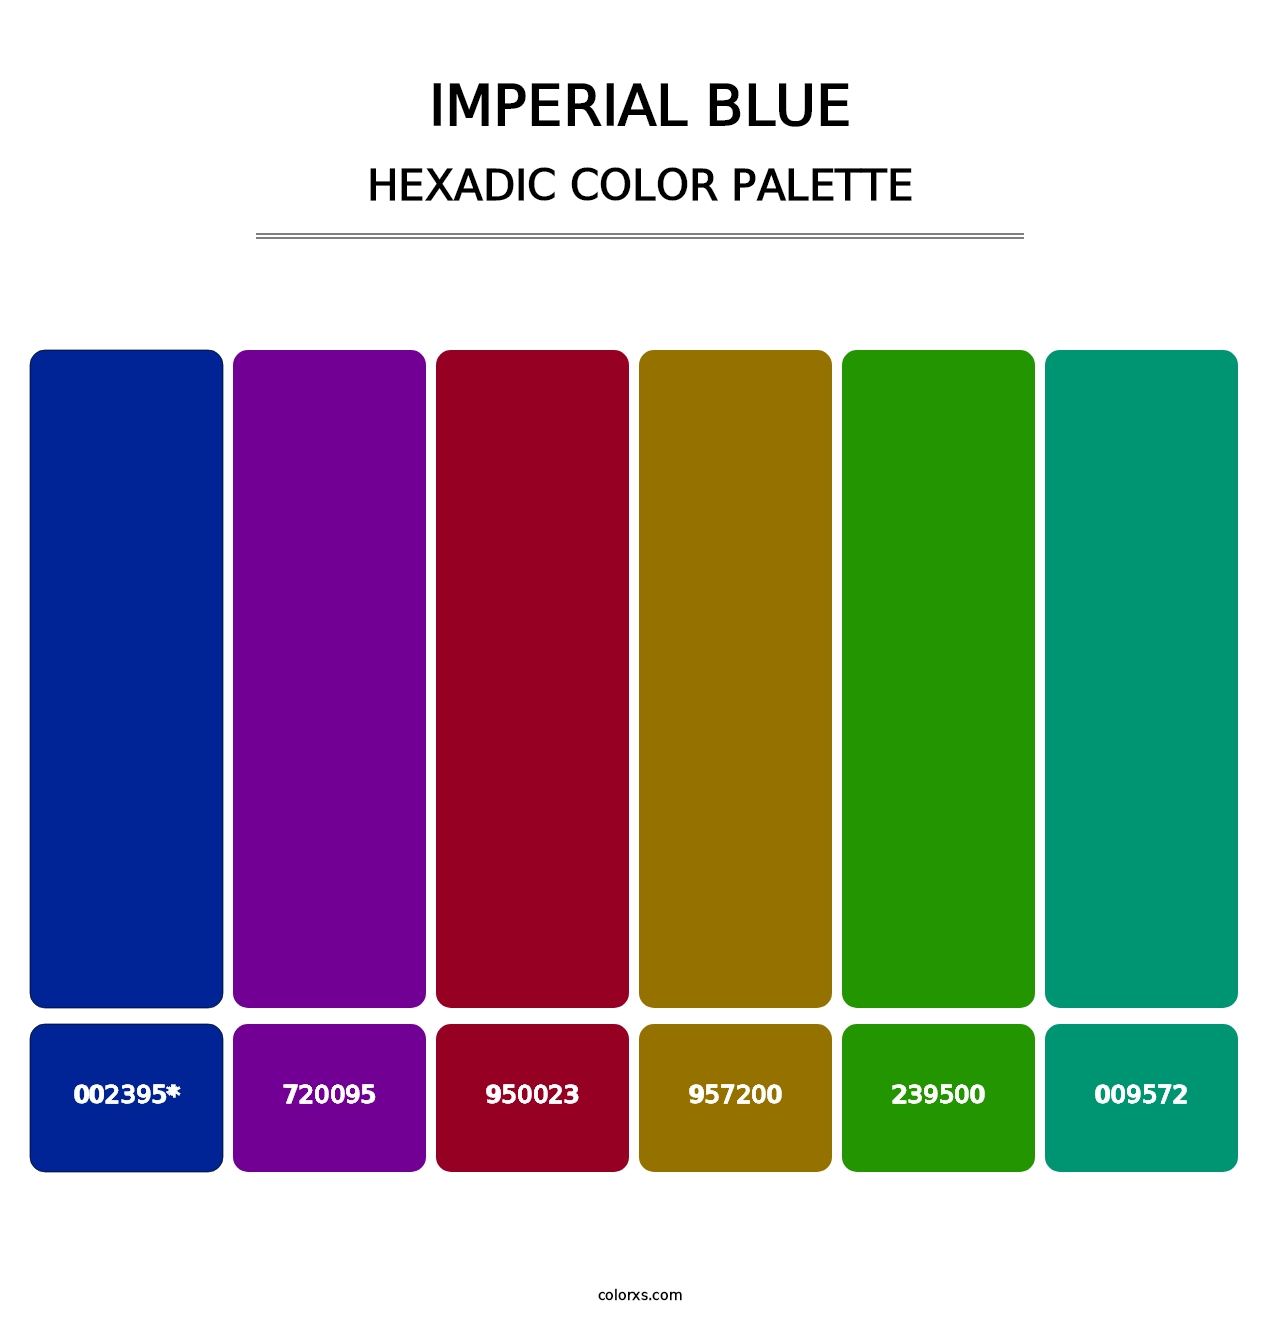 Imperial Blue - Hexadic Color Palette